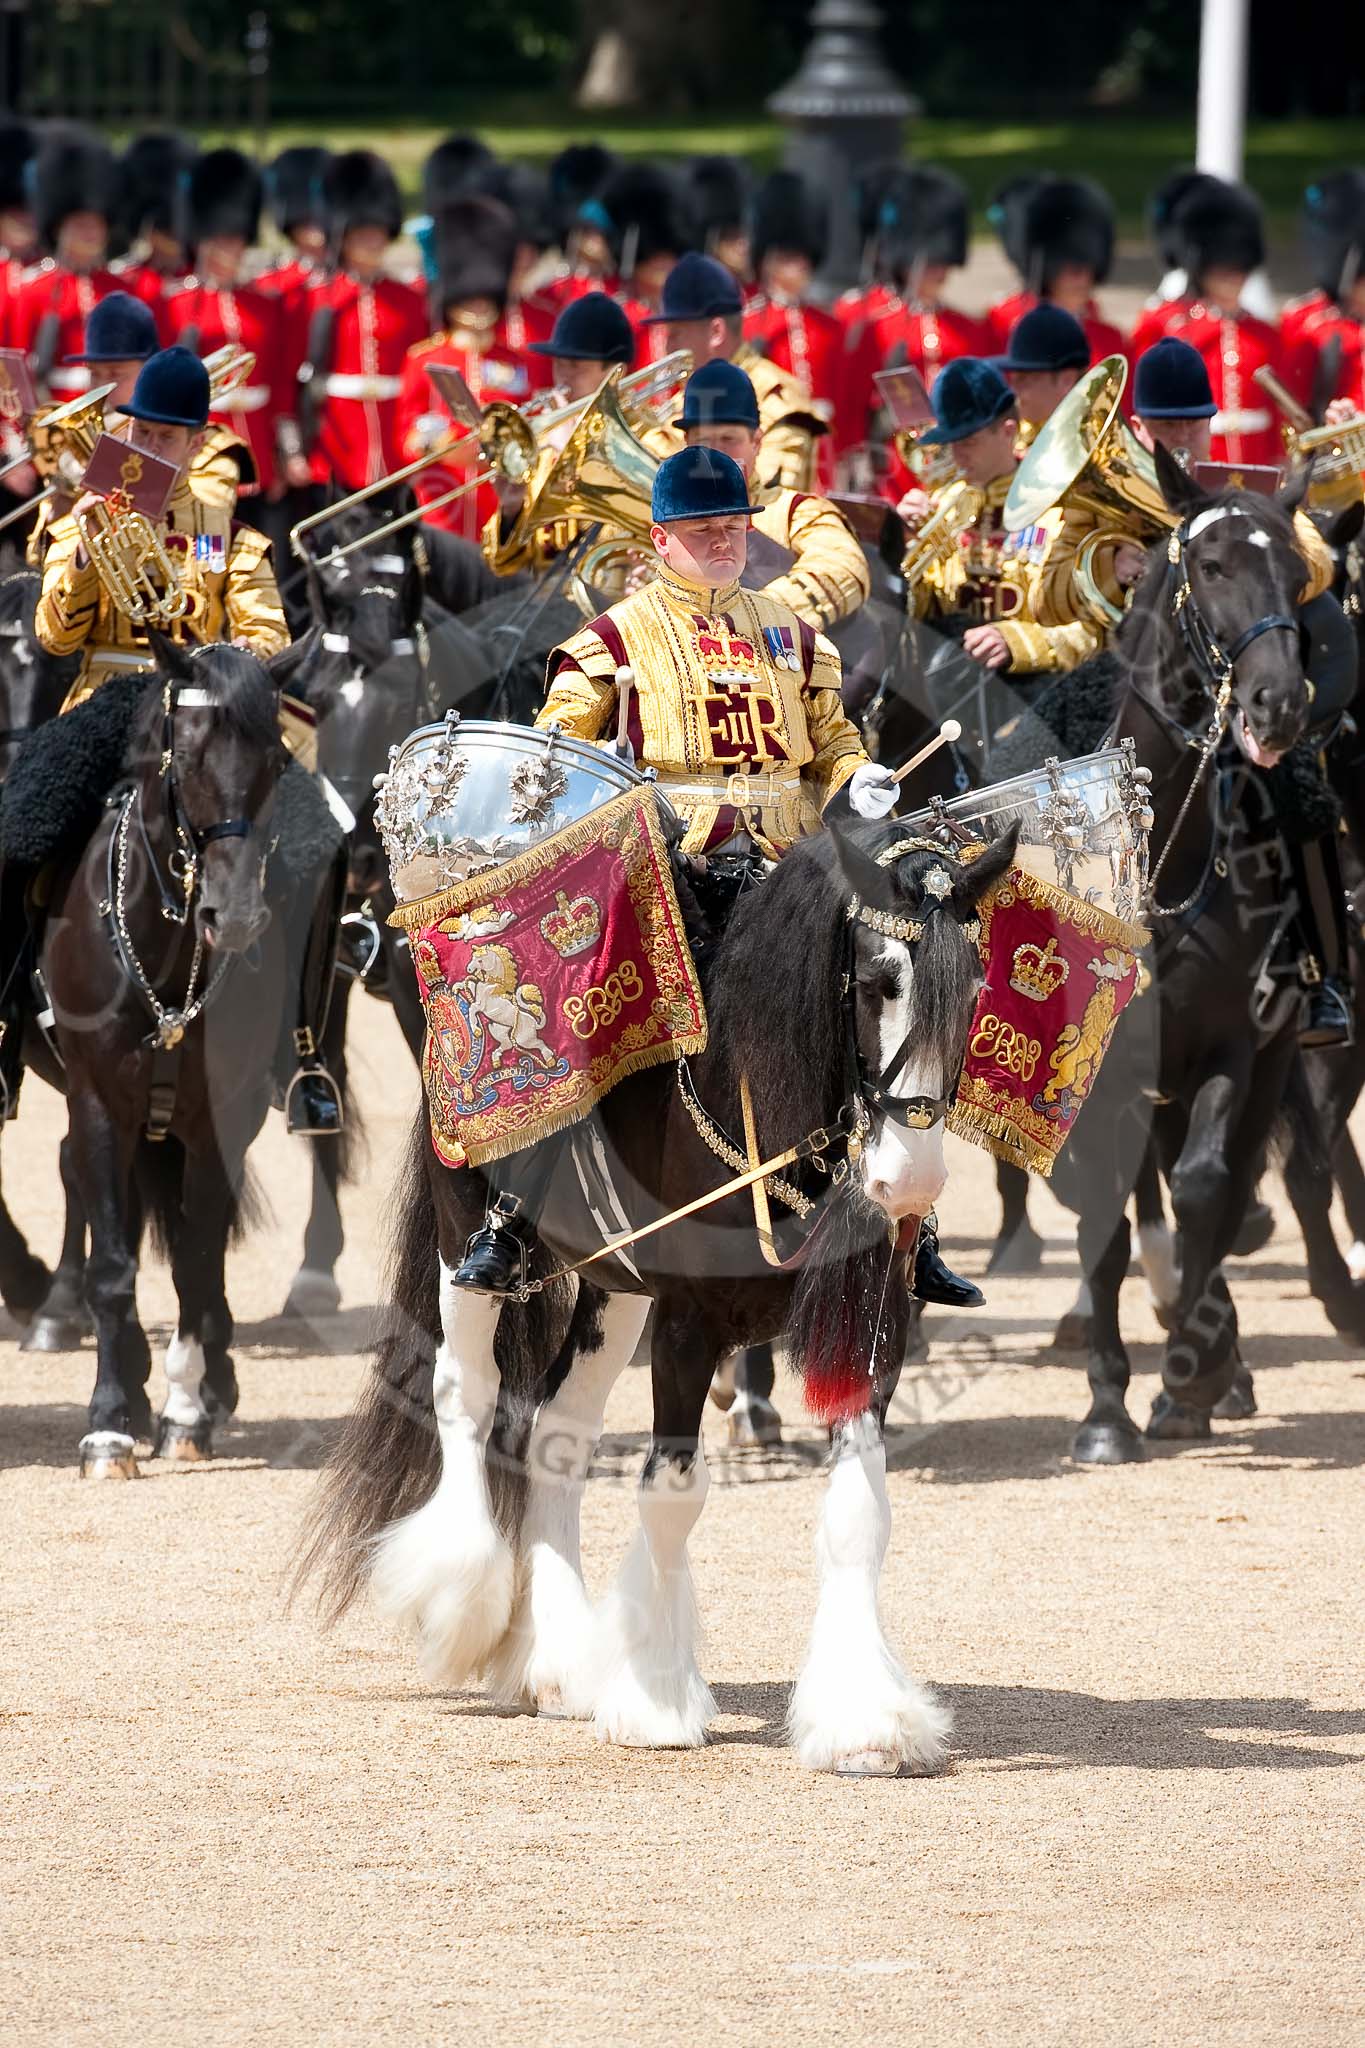 Trooping the Colour 2009: The Ride Past of the Mounted Bands of the Household Cavalry, one of the two kettle drummers in front..
Horse Guards Parade, Westminster,
London SW1,

United Kingdom,
on 13 June 2009 at 11:54, image #231